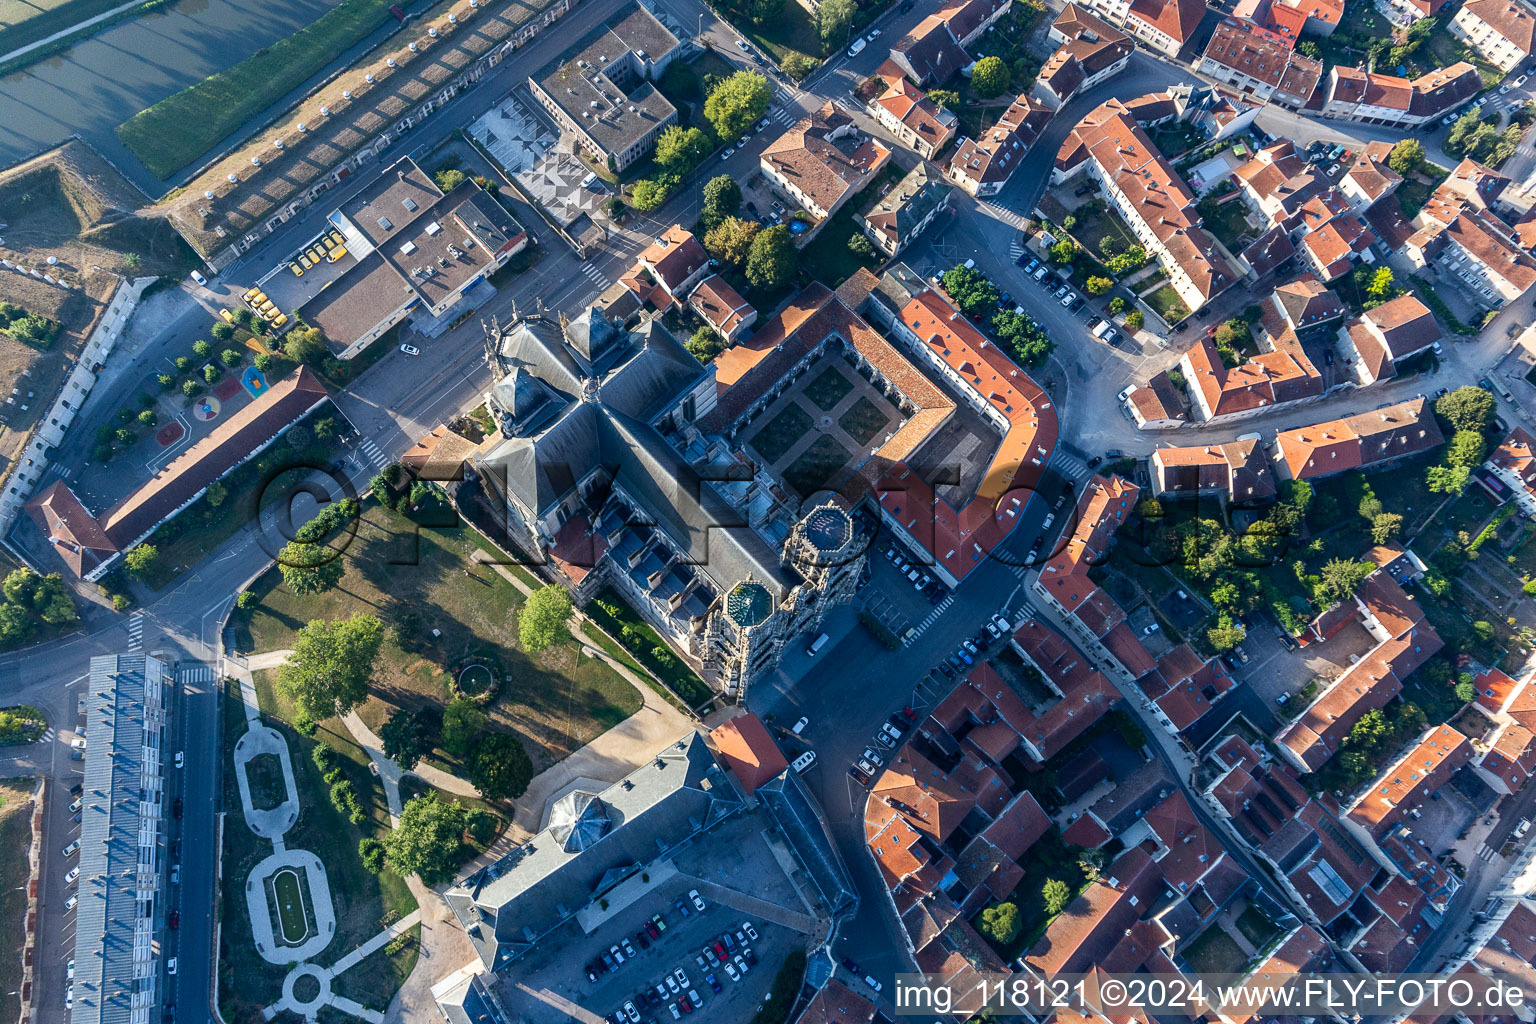 Aerial photograpy of Church building of the cathedral of St. Stephen's in Toul in Grand Est, France